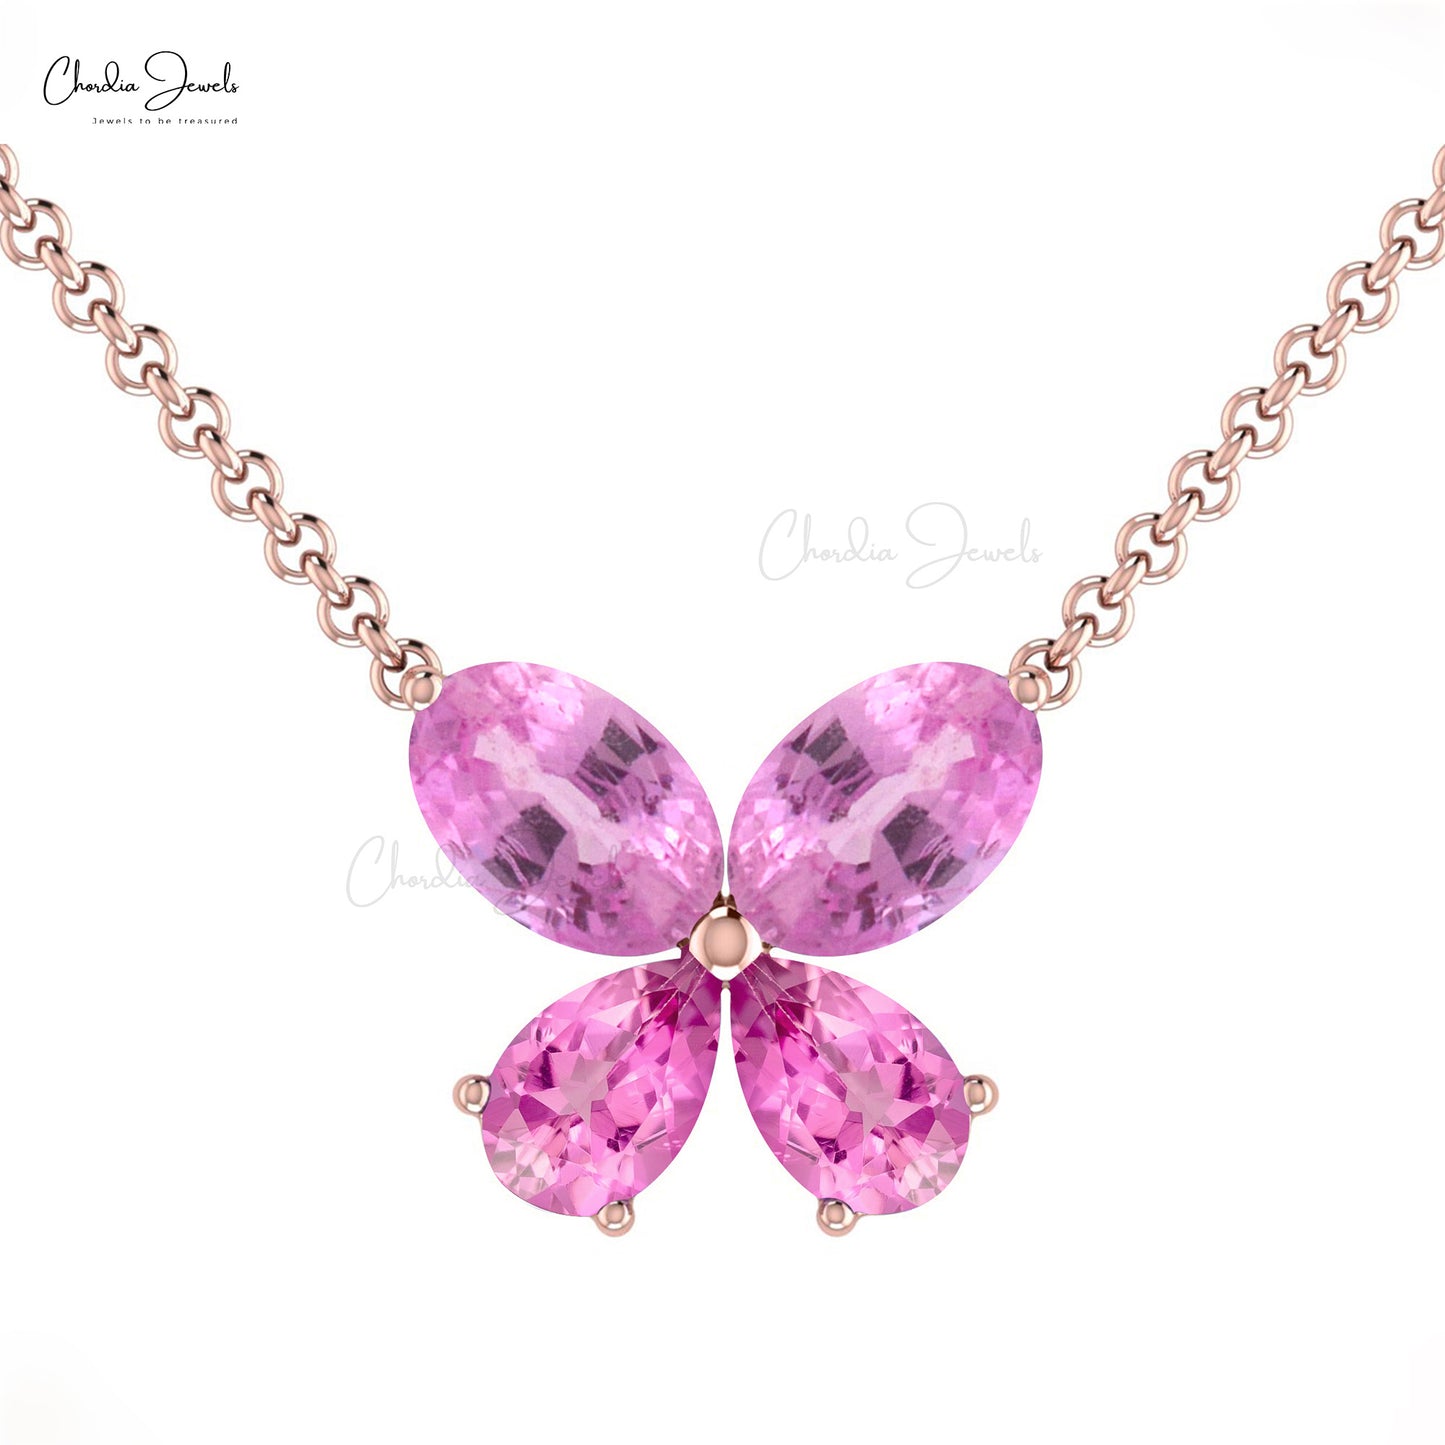 New Classic Design Butterfly Necklace in 14k Solid Gold Genuine Pink Sapphire Gemstone Necklace Pendant Light Weight Jewelry For Gift